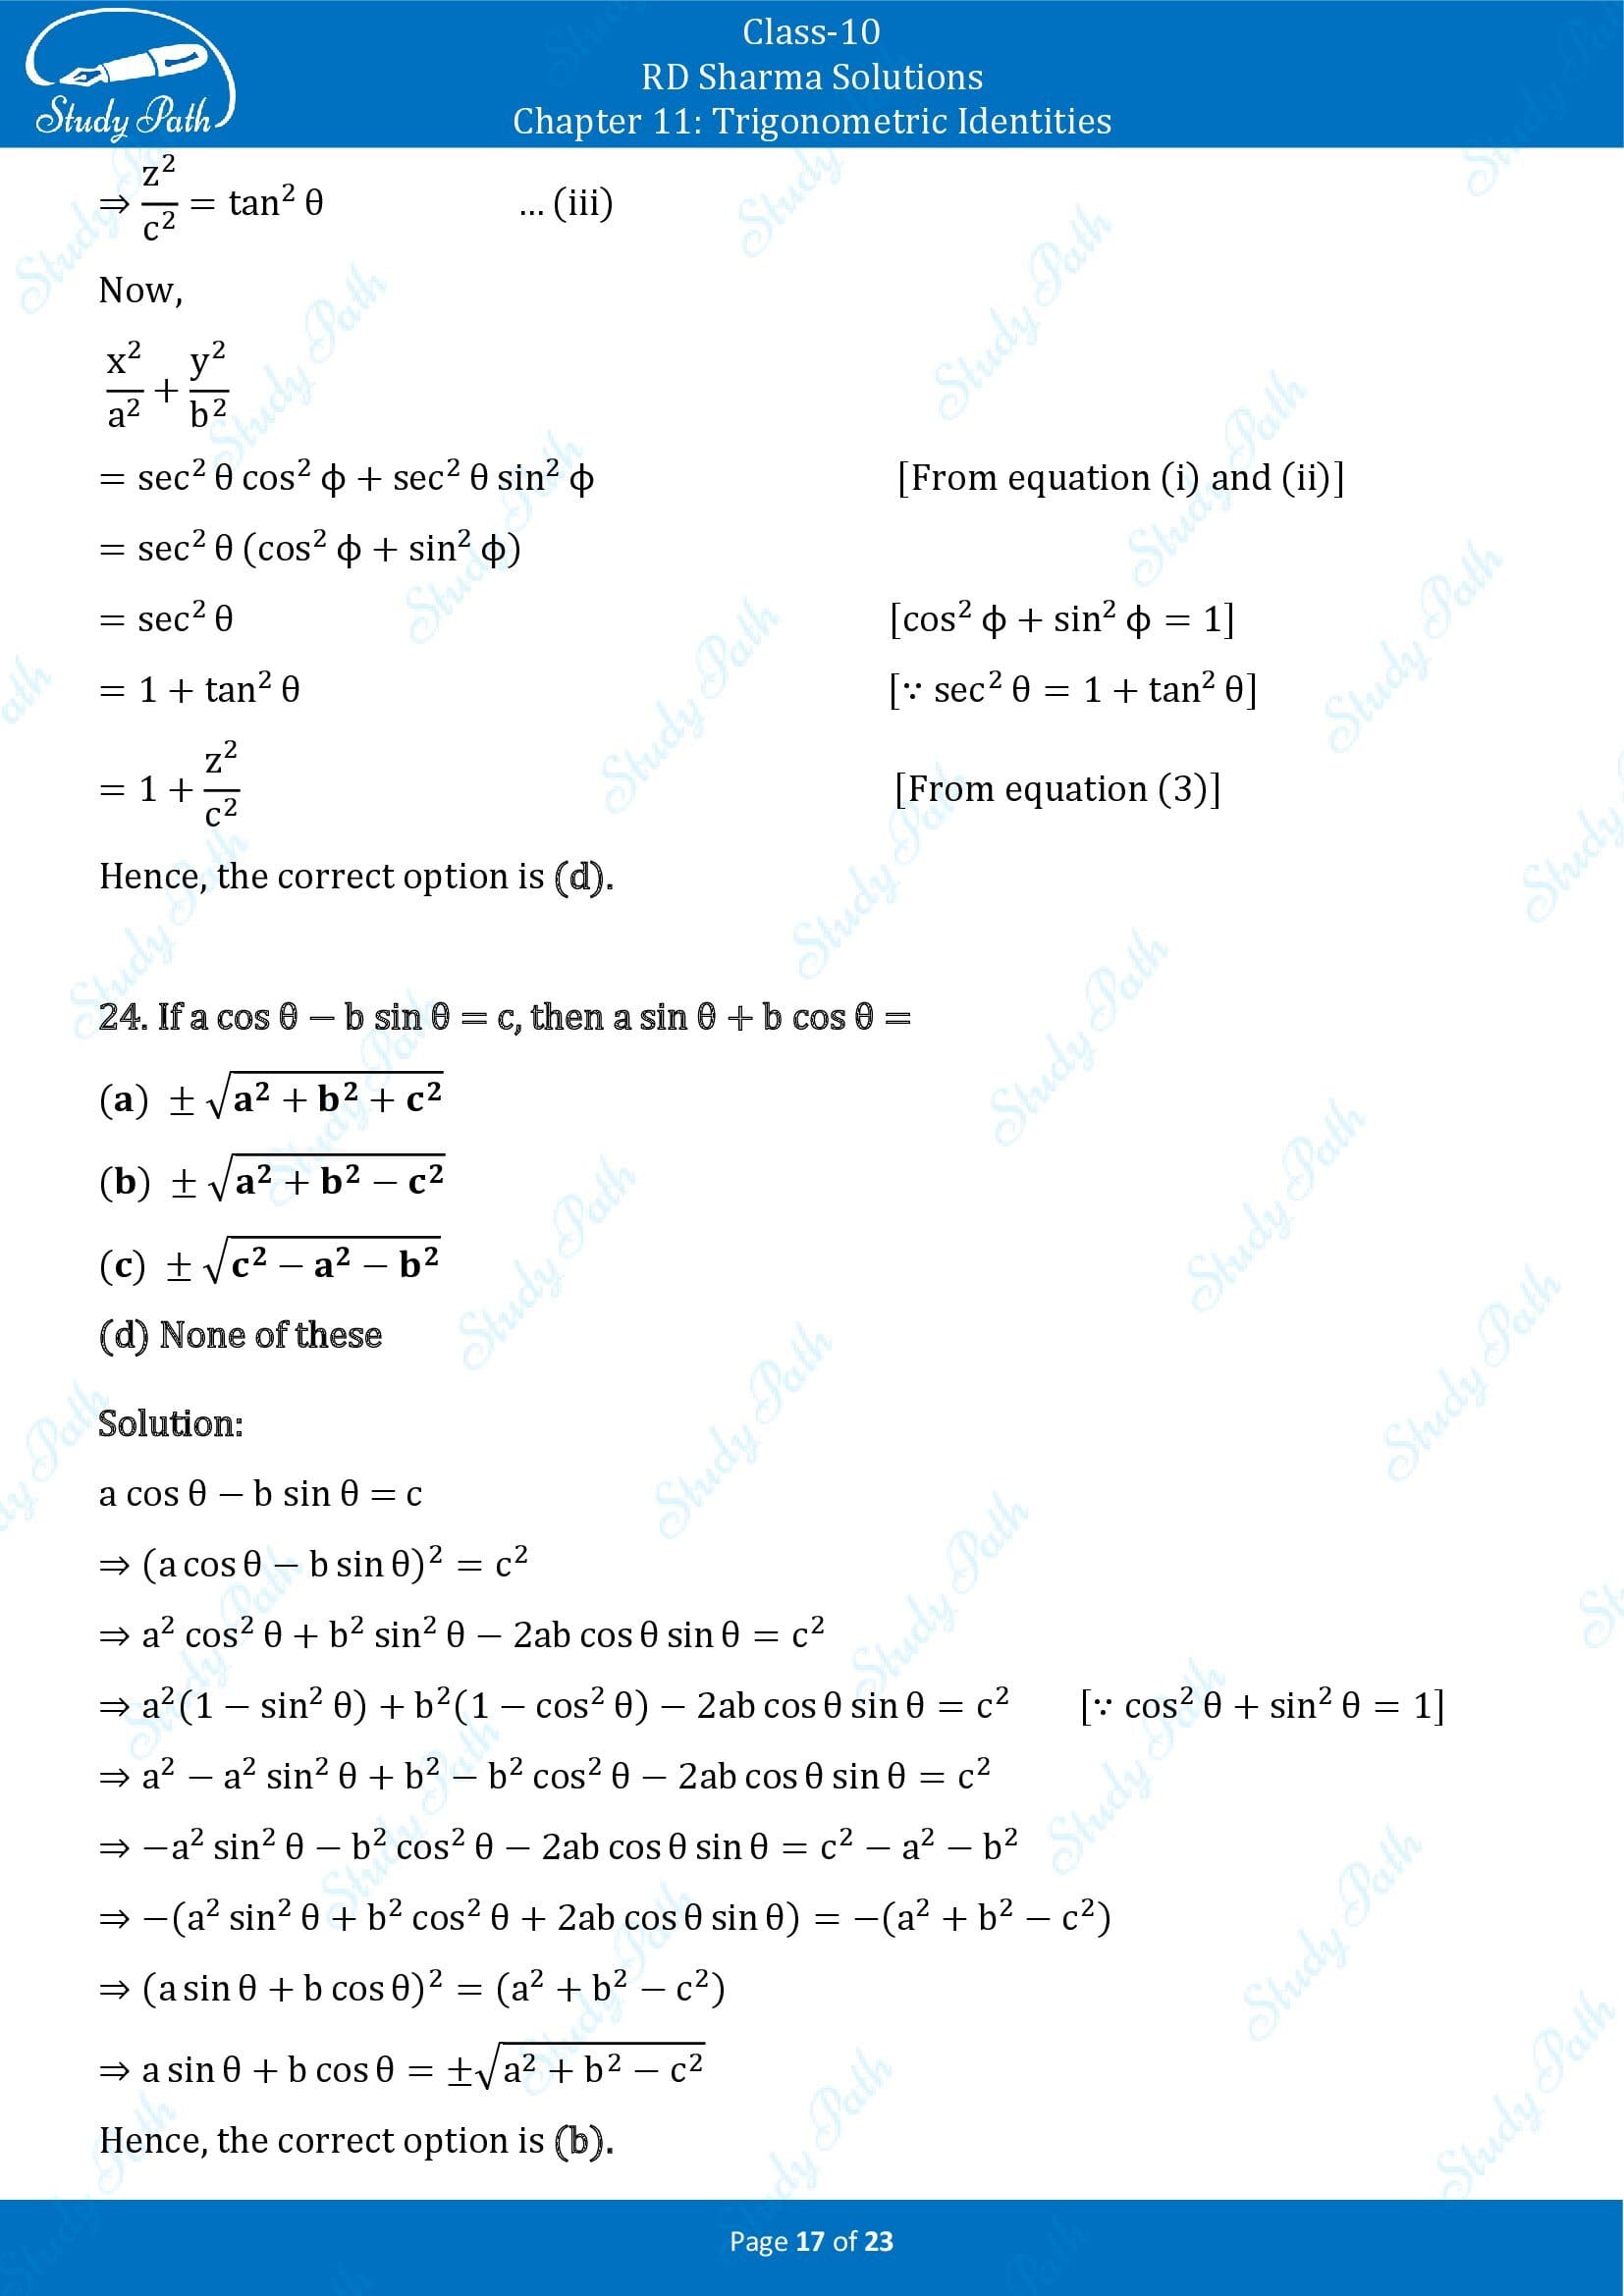 RD Sharma Solutions Class 10 Chapter 11 Trigonometric Identities Multiple Choice Questions MCQs 00017